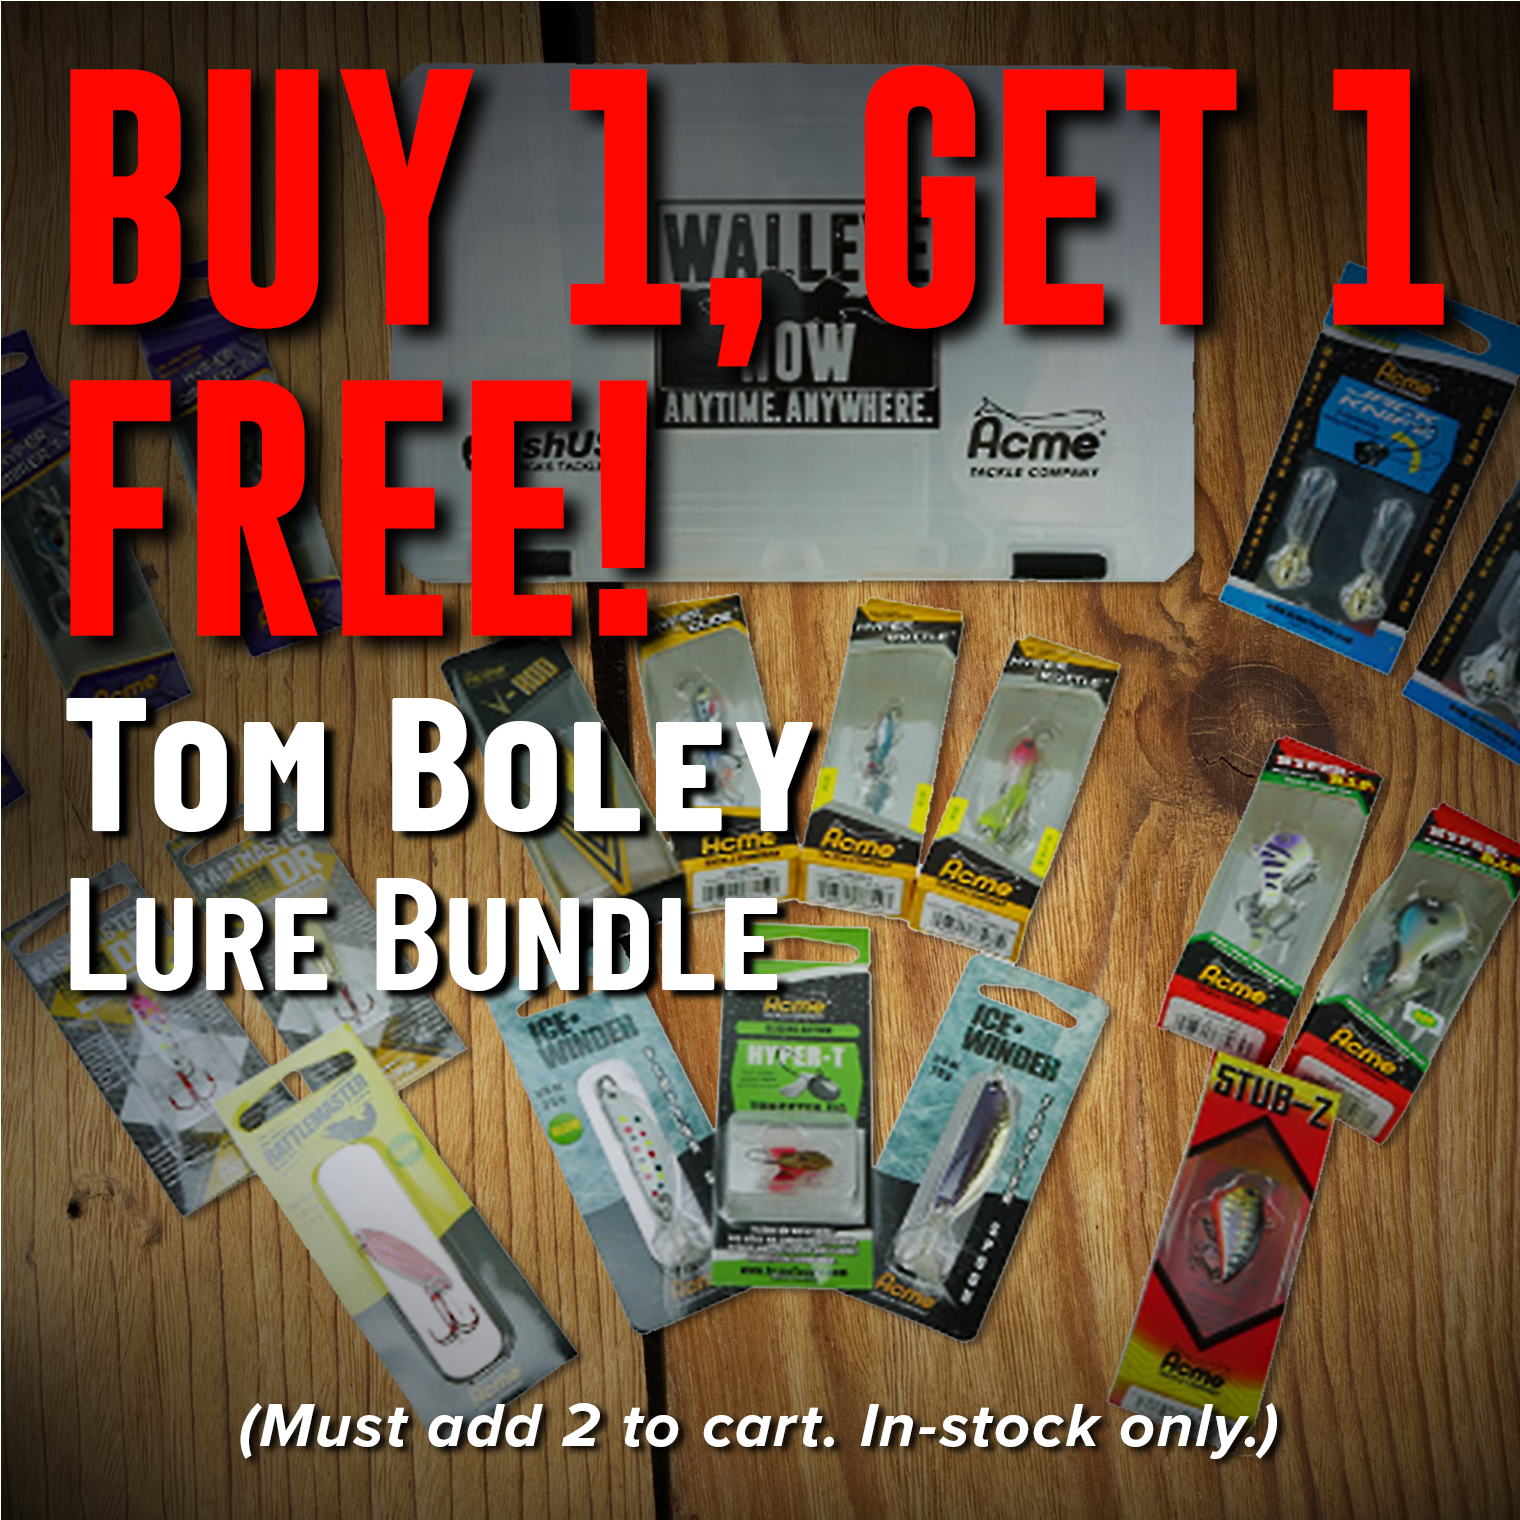 Buy 1, Get 1 Free! Tom Boley Lure Bundle (Must add 2 to cart. In-stock only.)